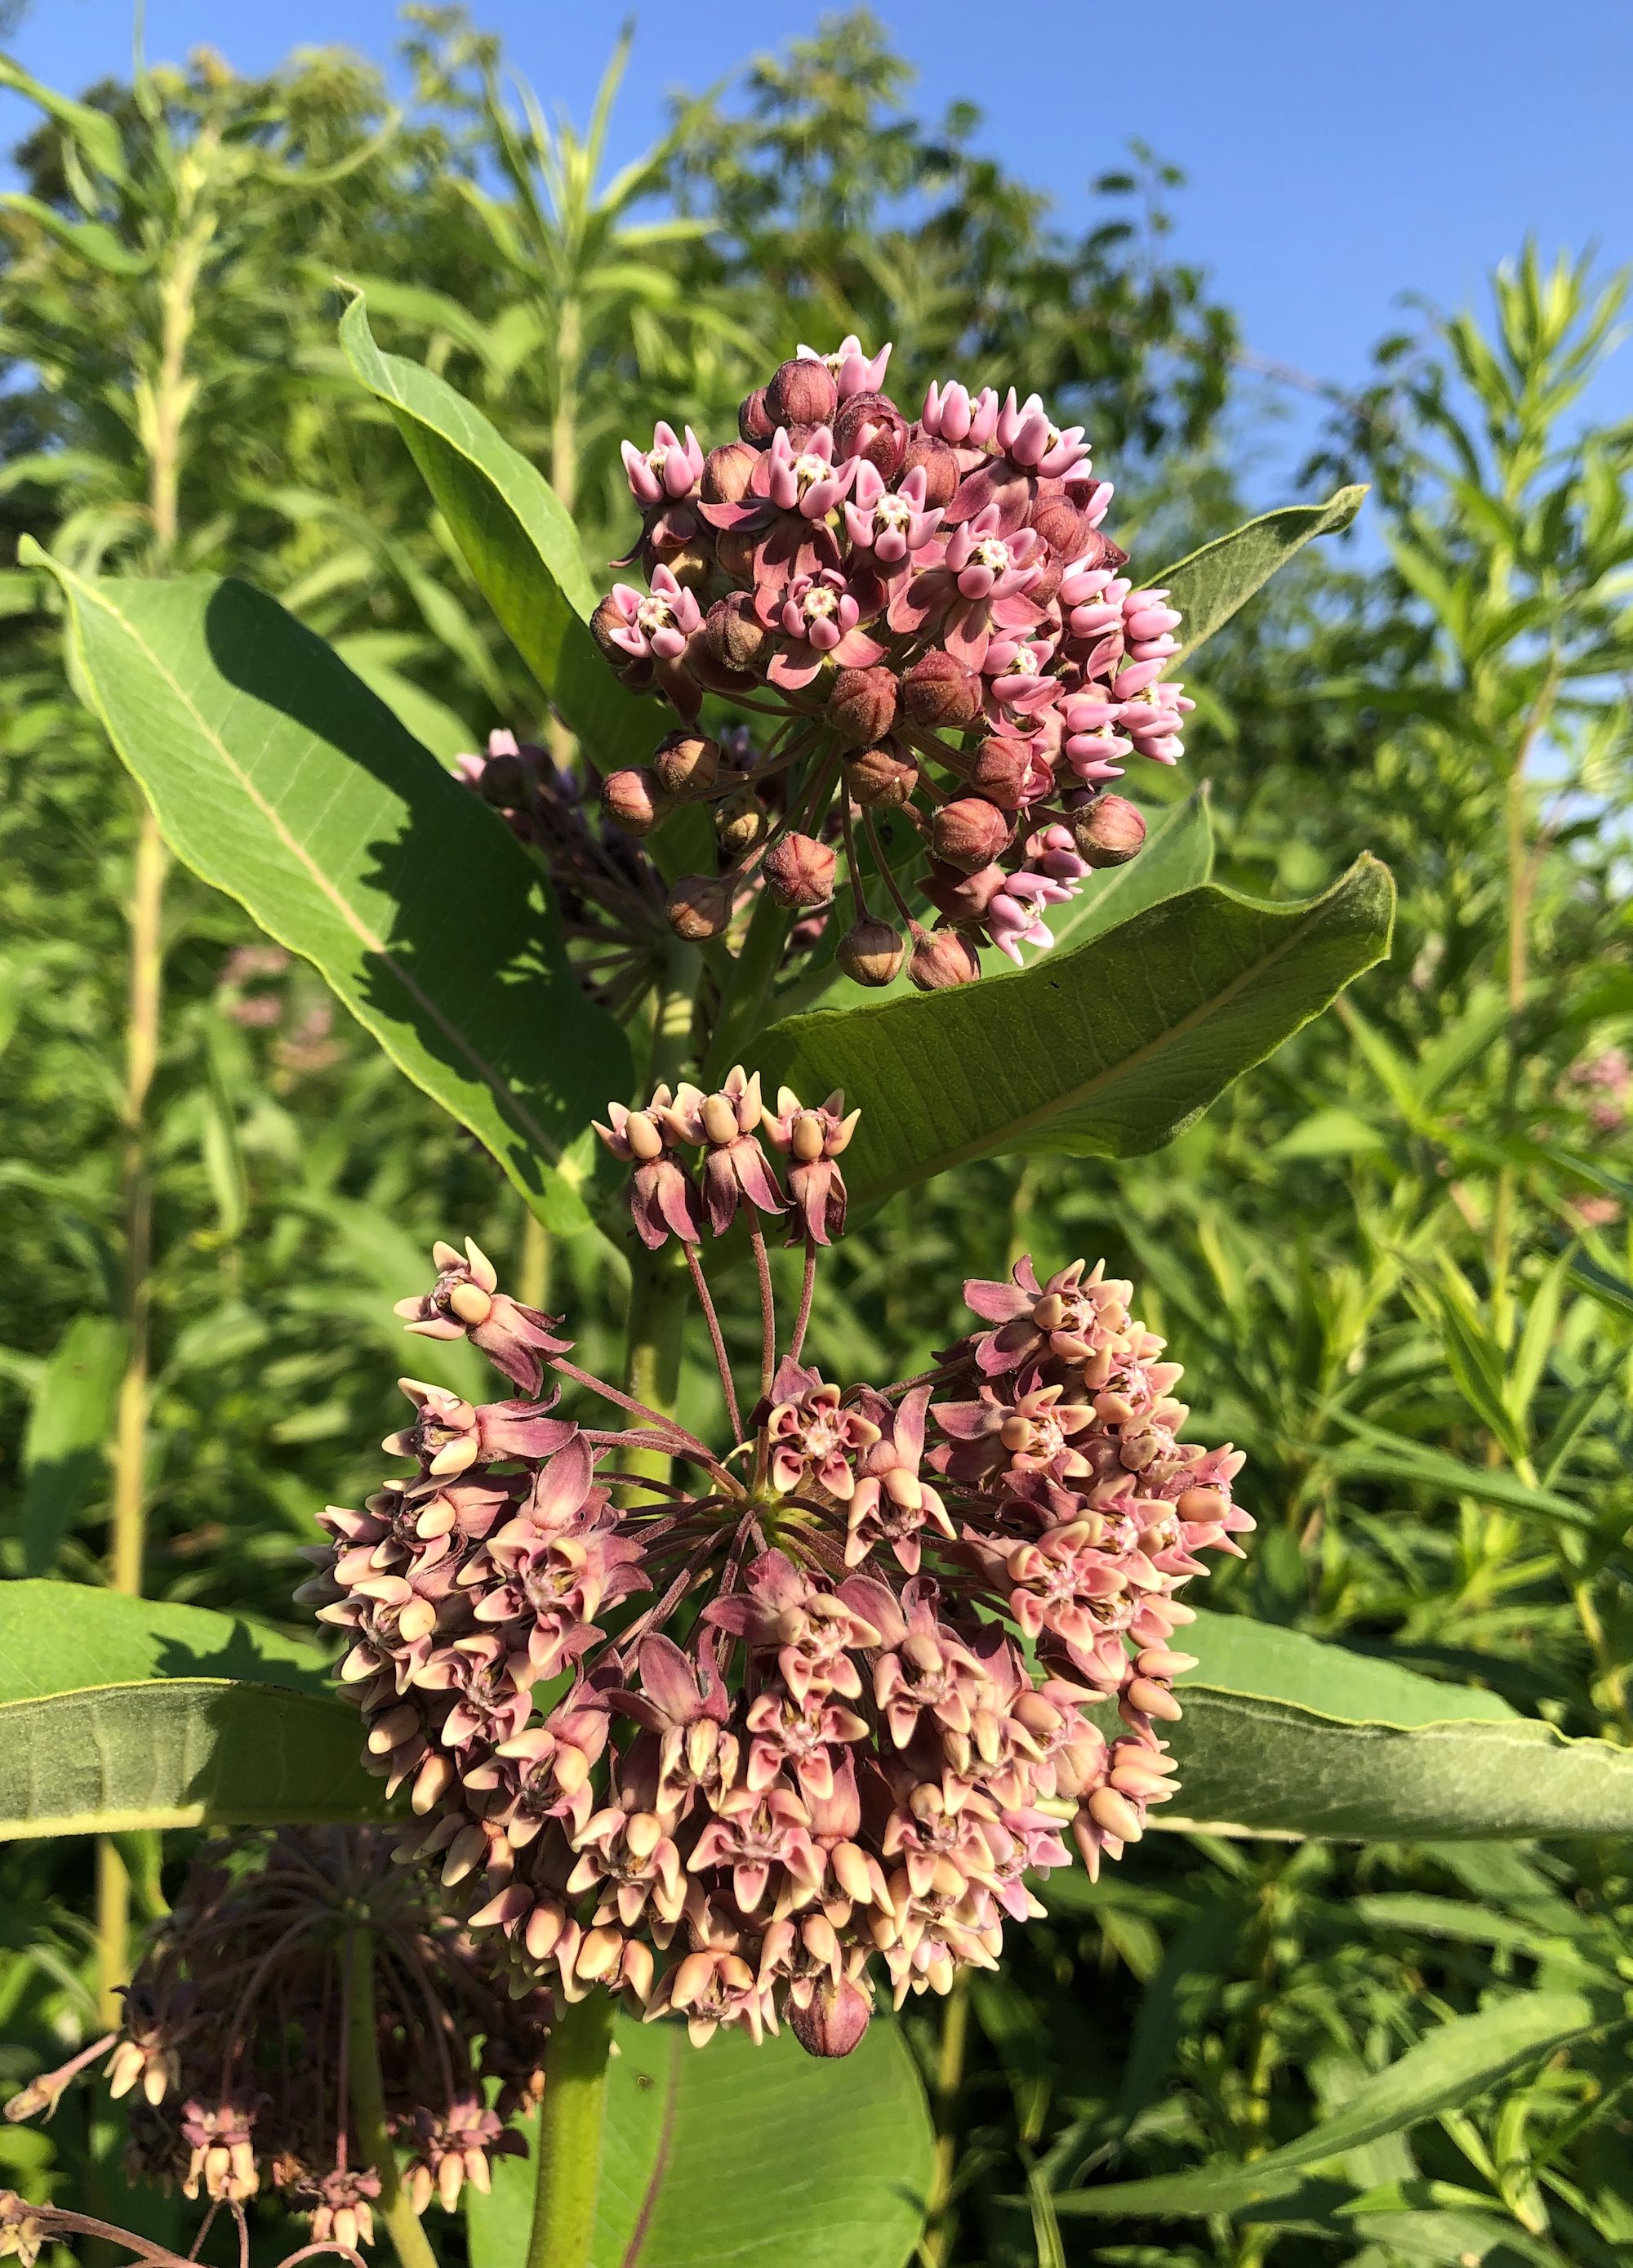 Common Milkweed on shore of Marion Dunn Pond on July 7, 2019.